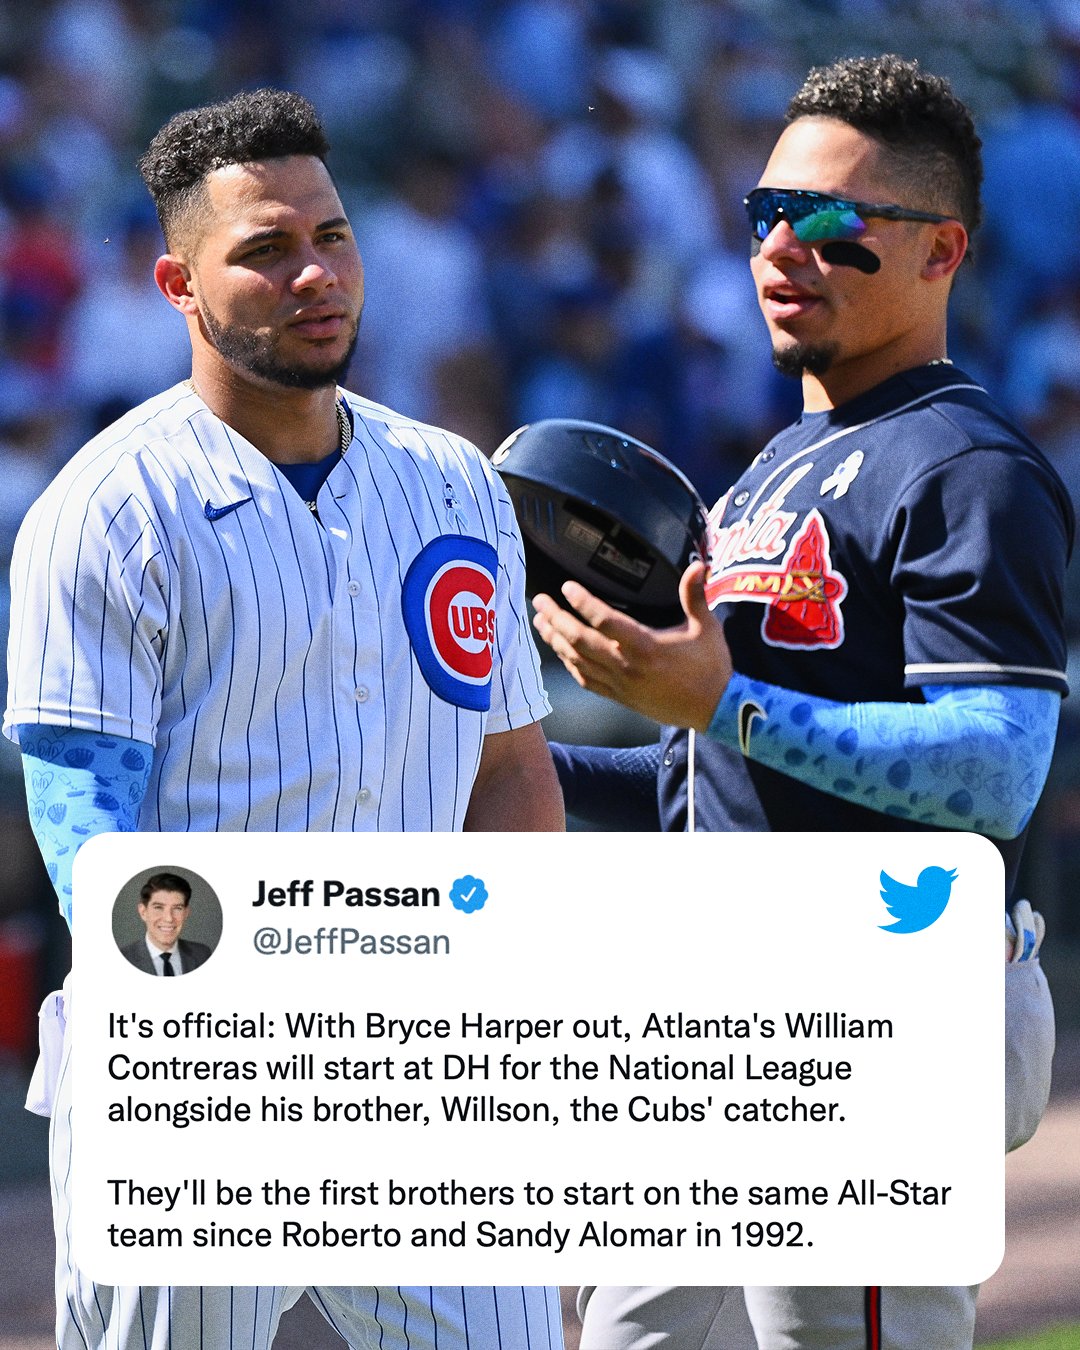 ESPN on X: The Contreras brothers will start together in the MLB